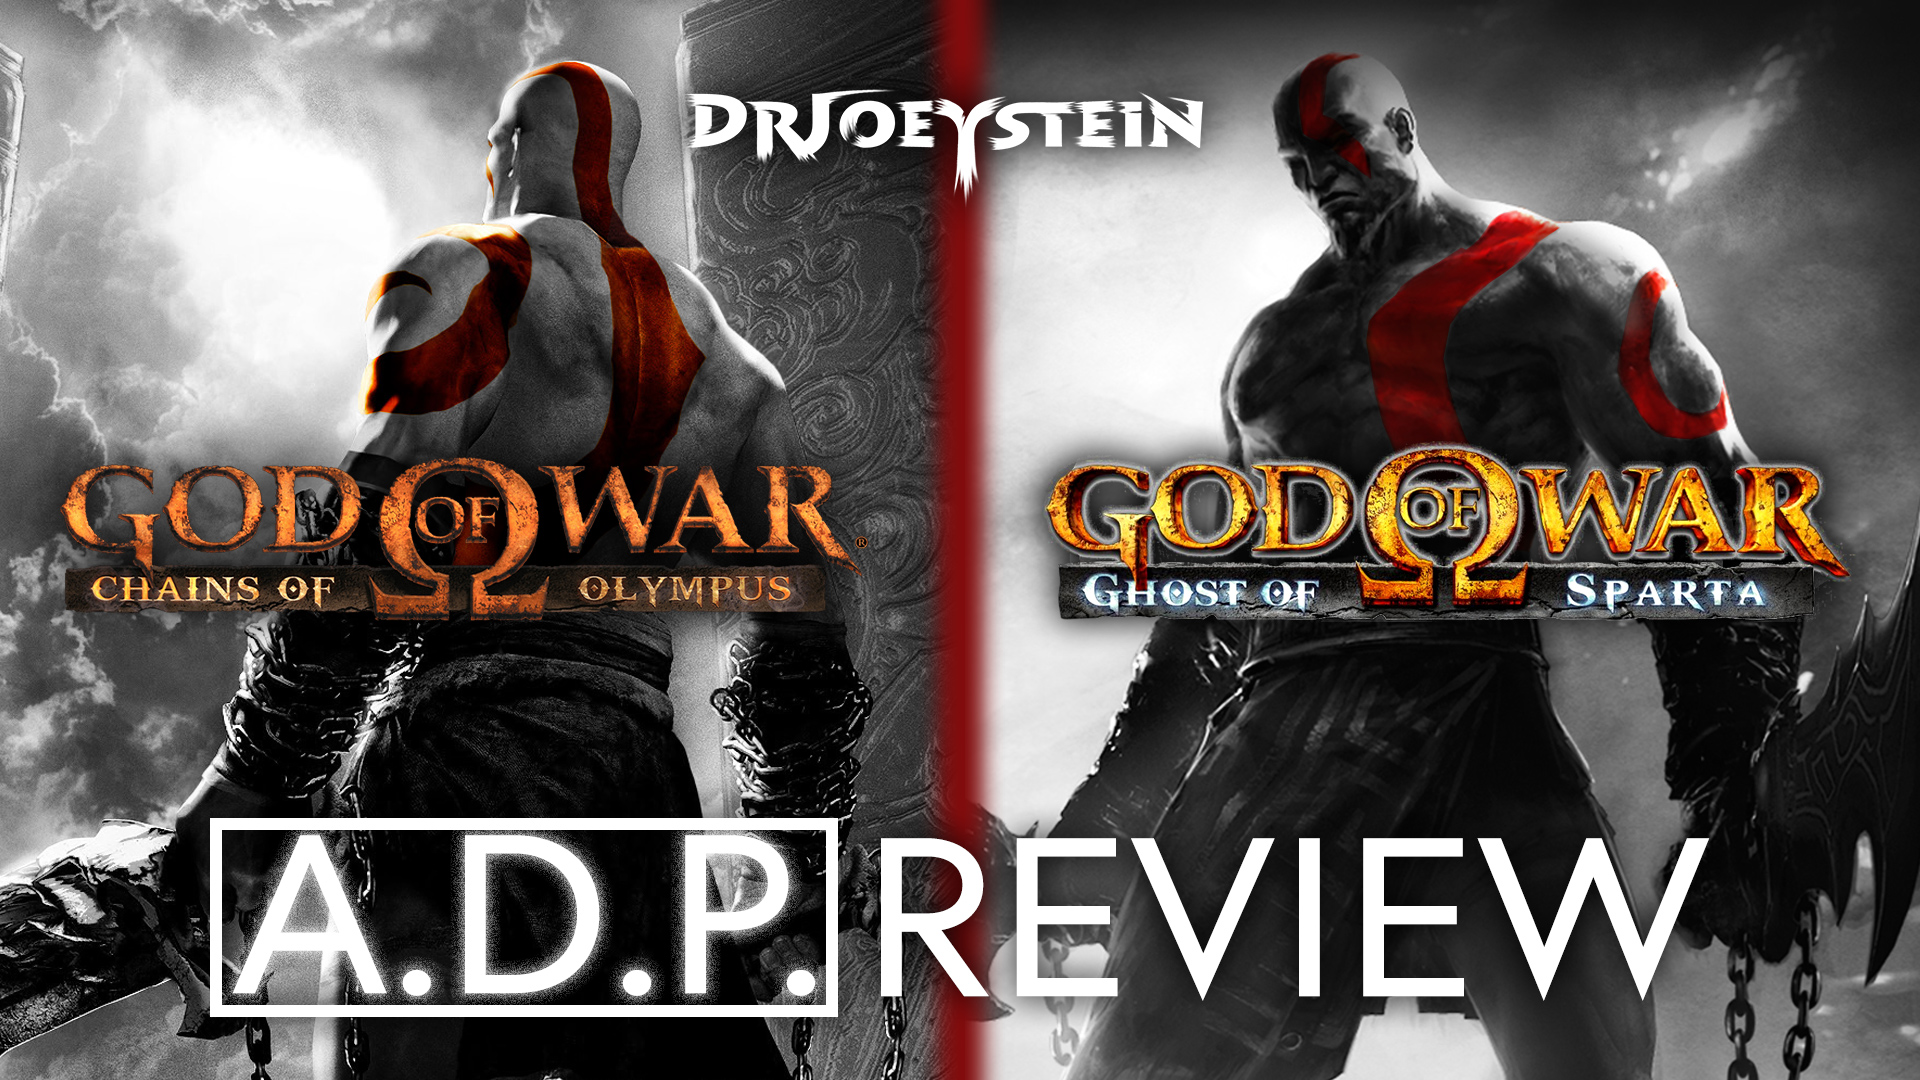 God of War: Ghost of Sparta Review (PSP)